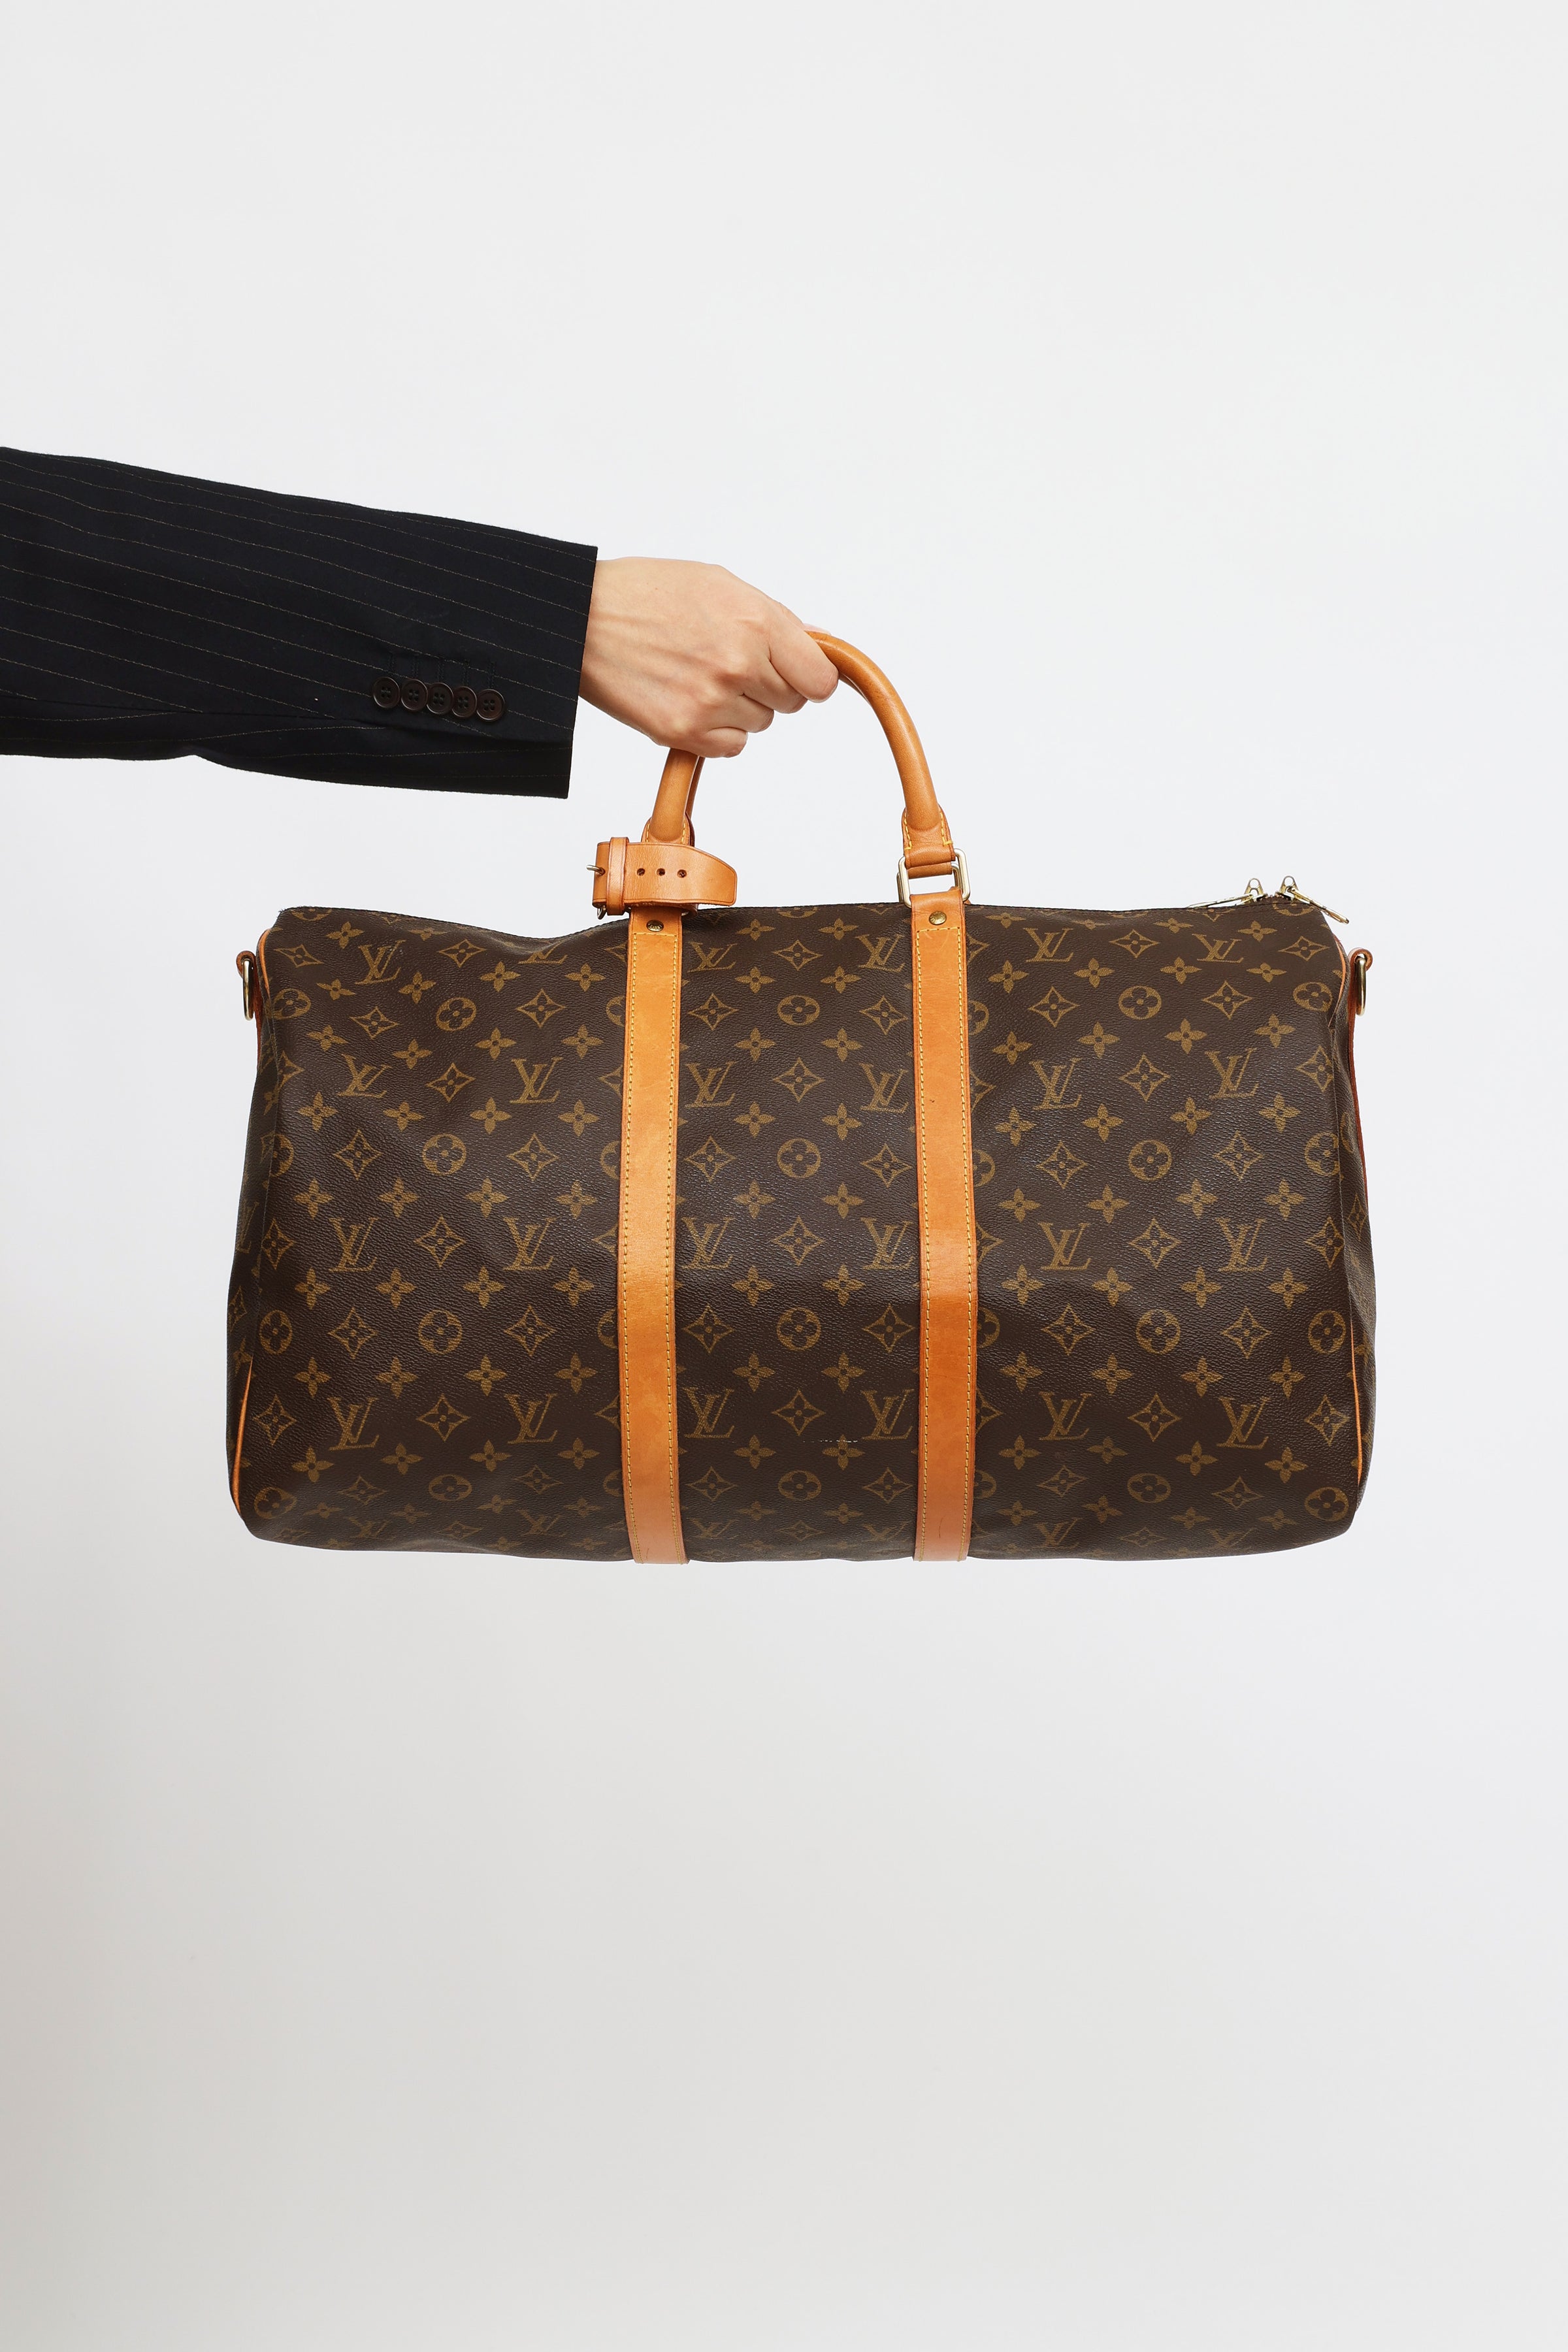 Louis Vuitton Keepall owners? How do you like it?